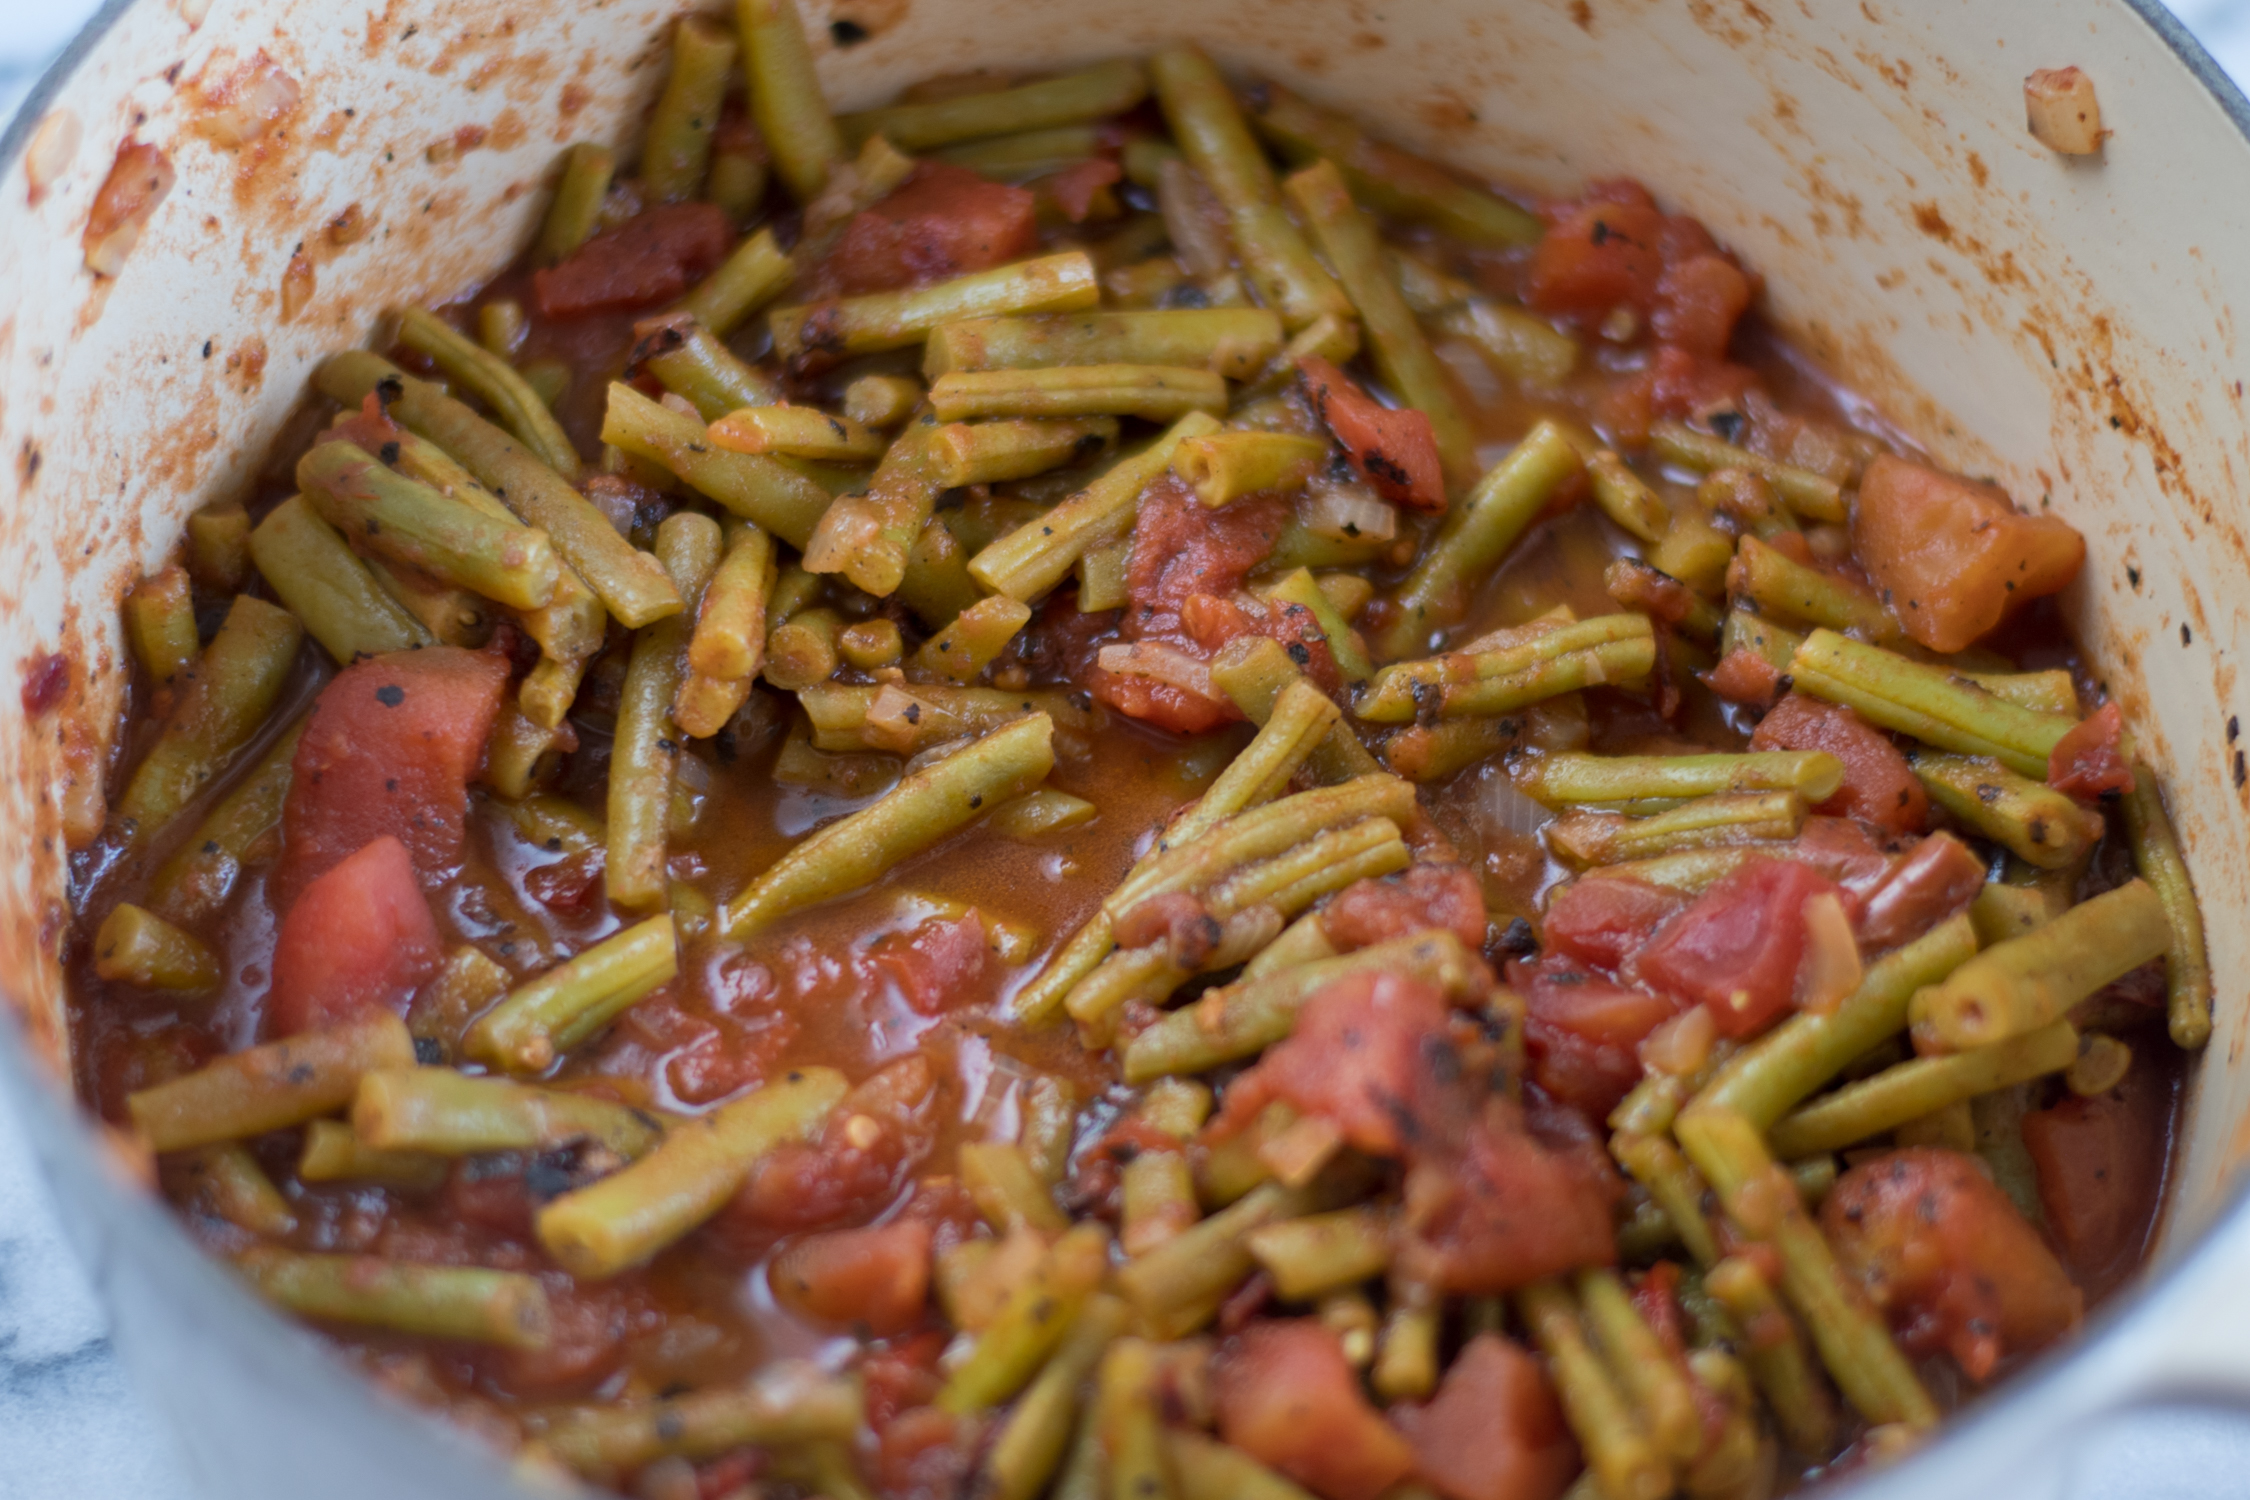 Green beans simmered with tomatoes.